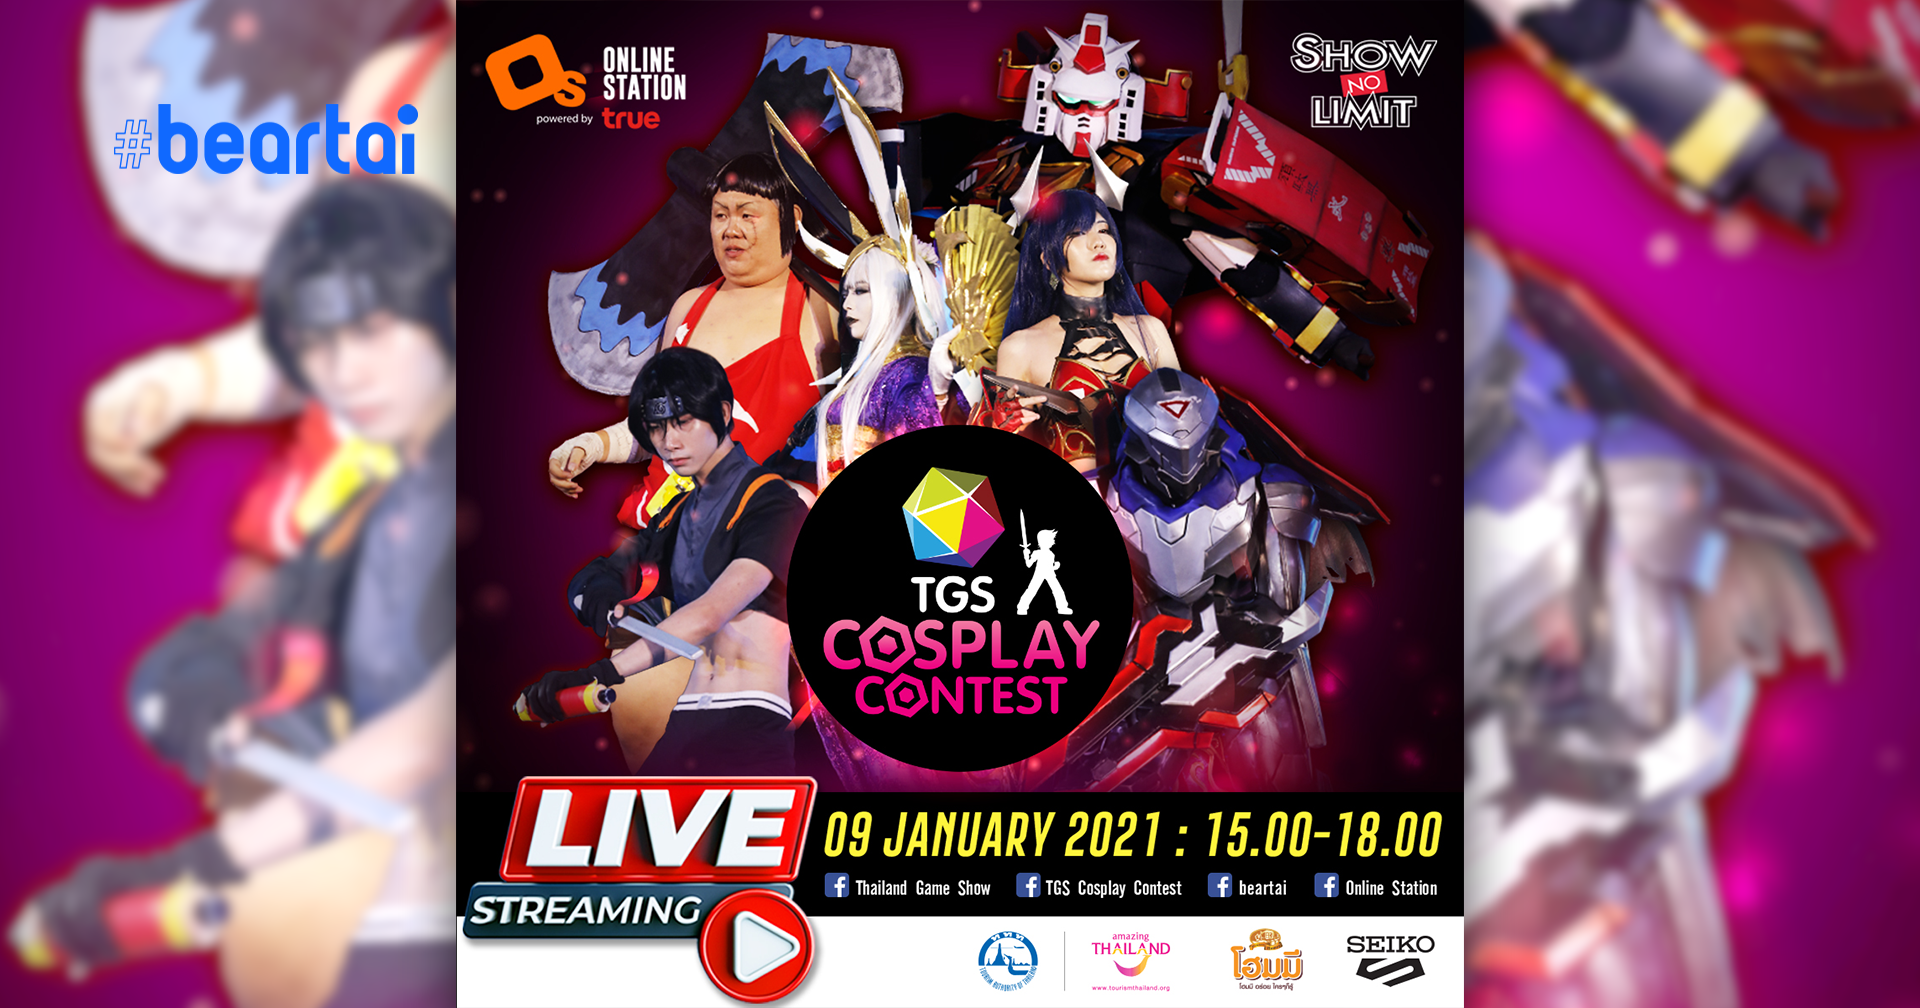 tgs thailand game show tgs cosplay contest